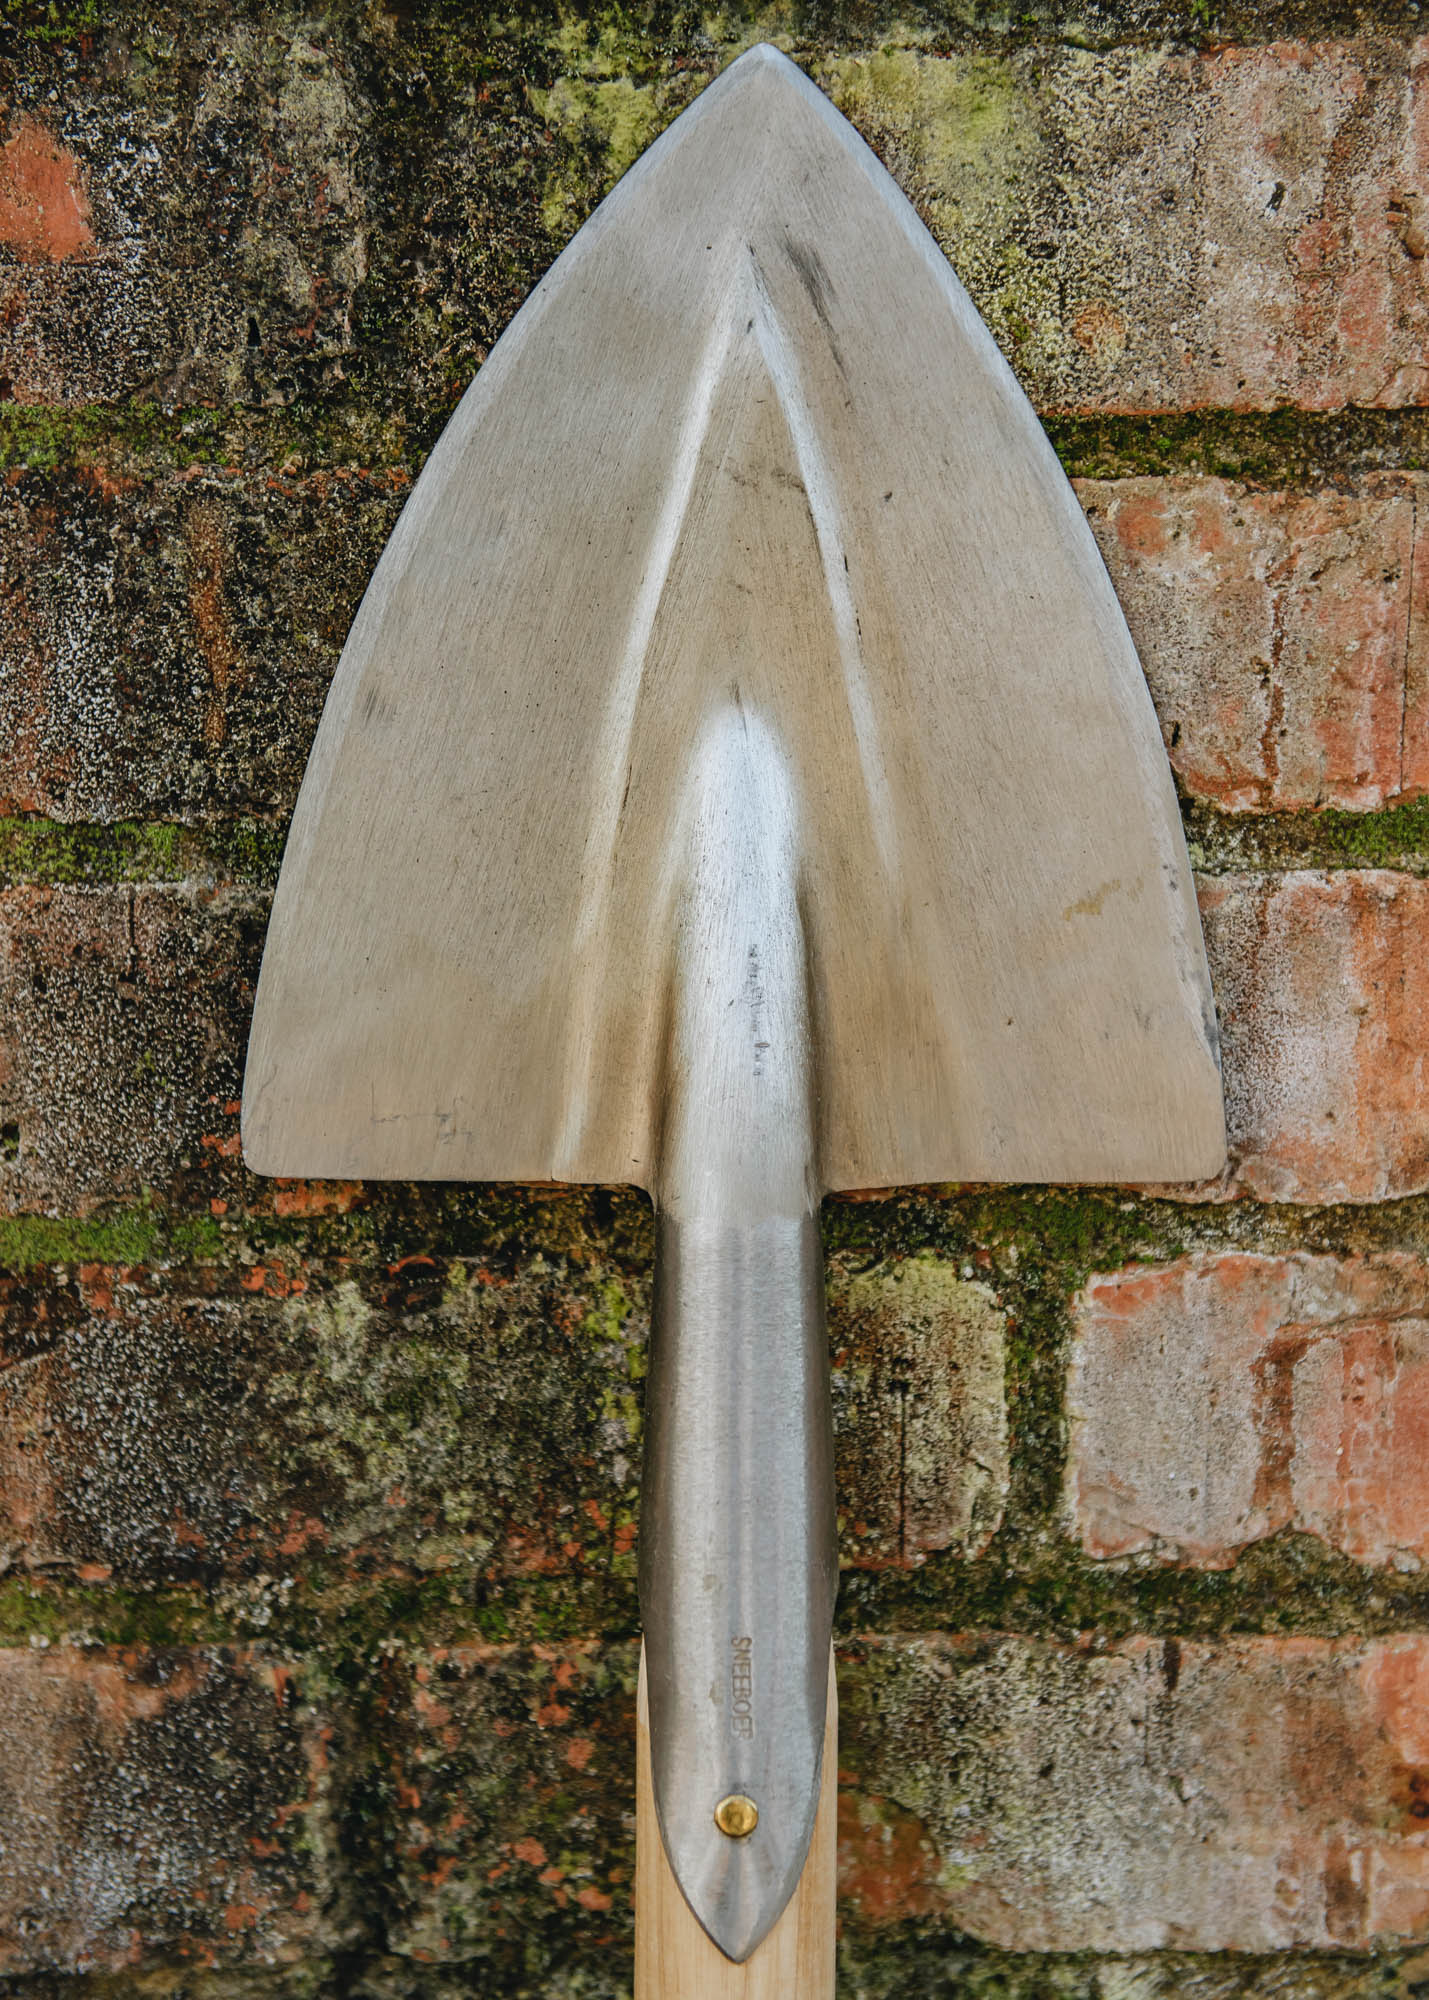 Pointed Spade